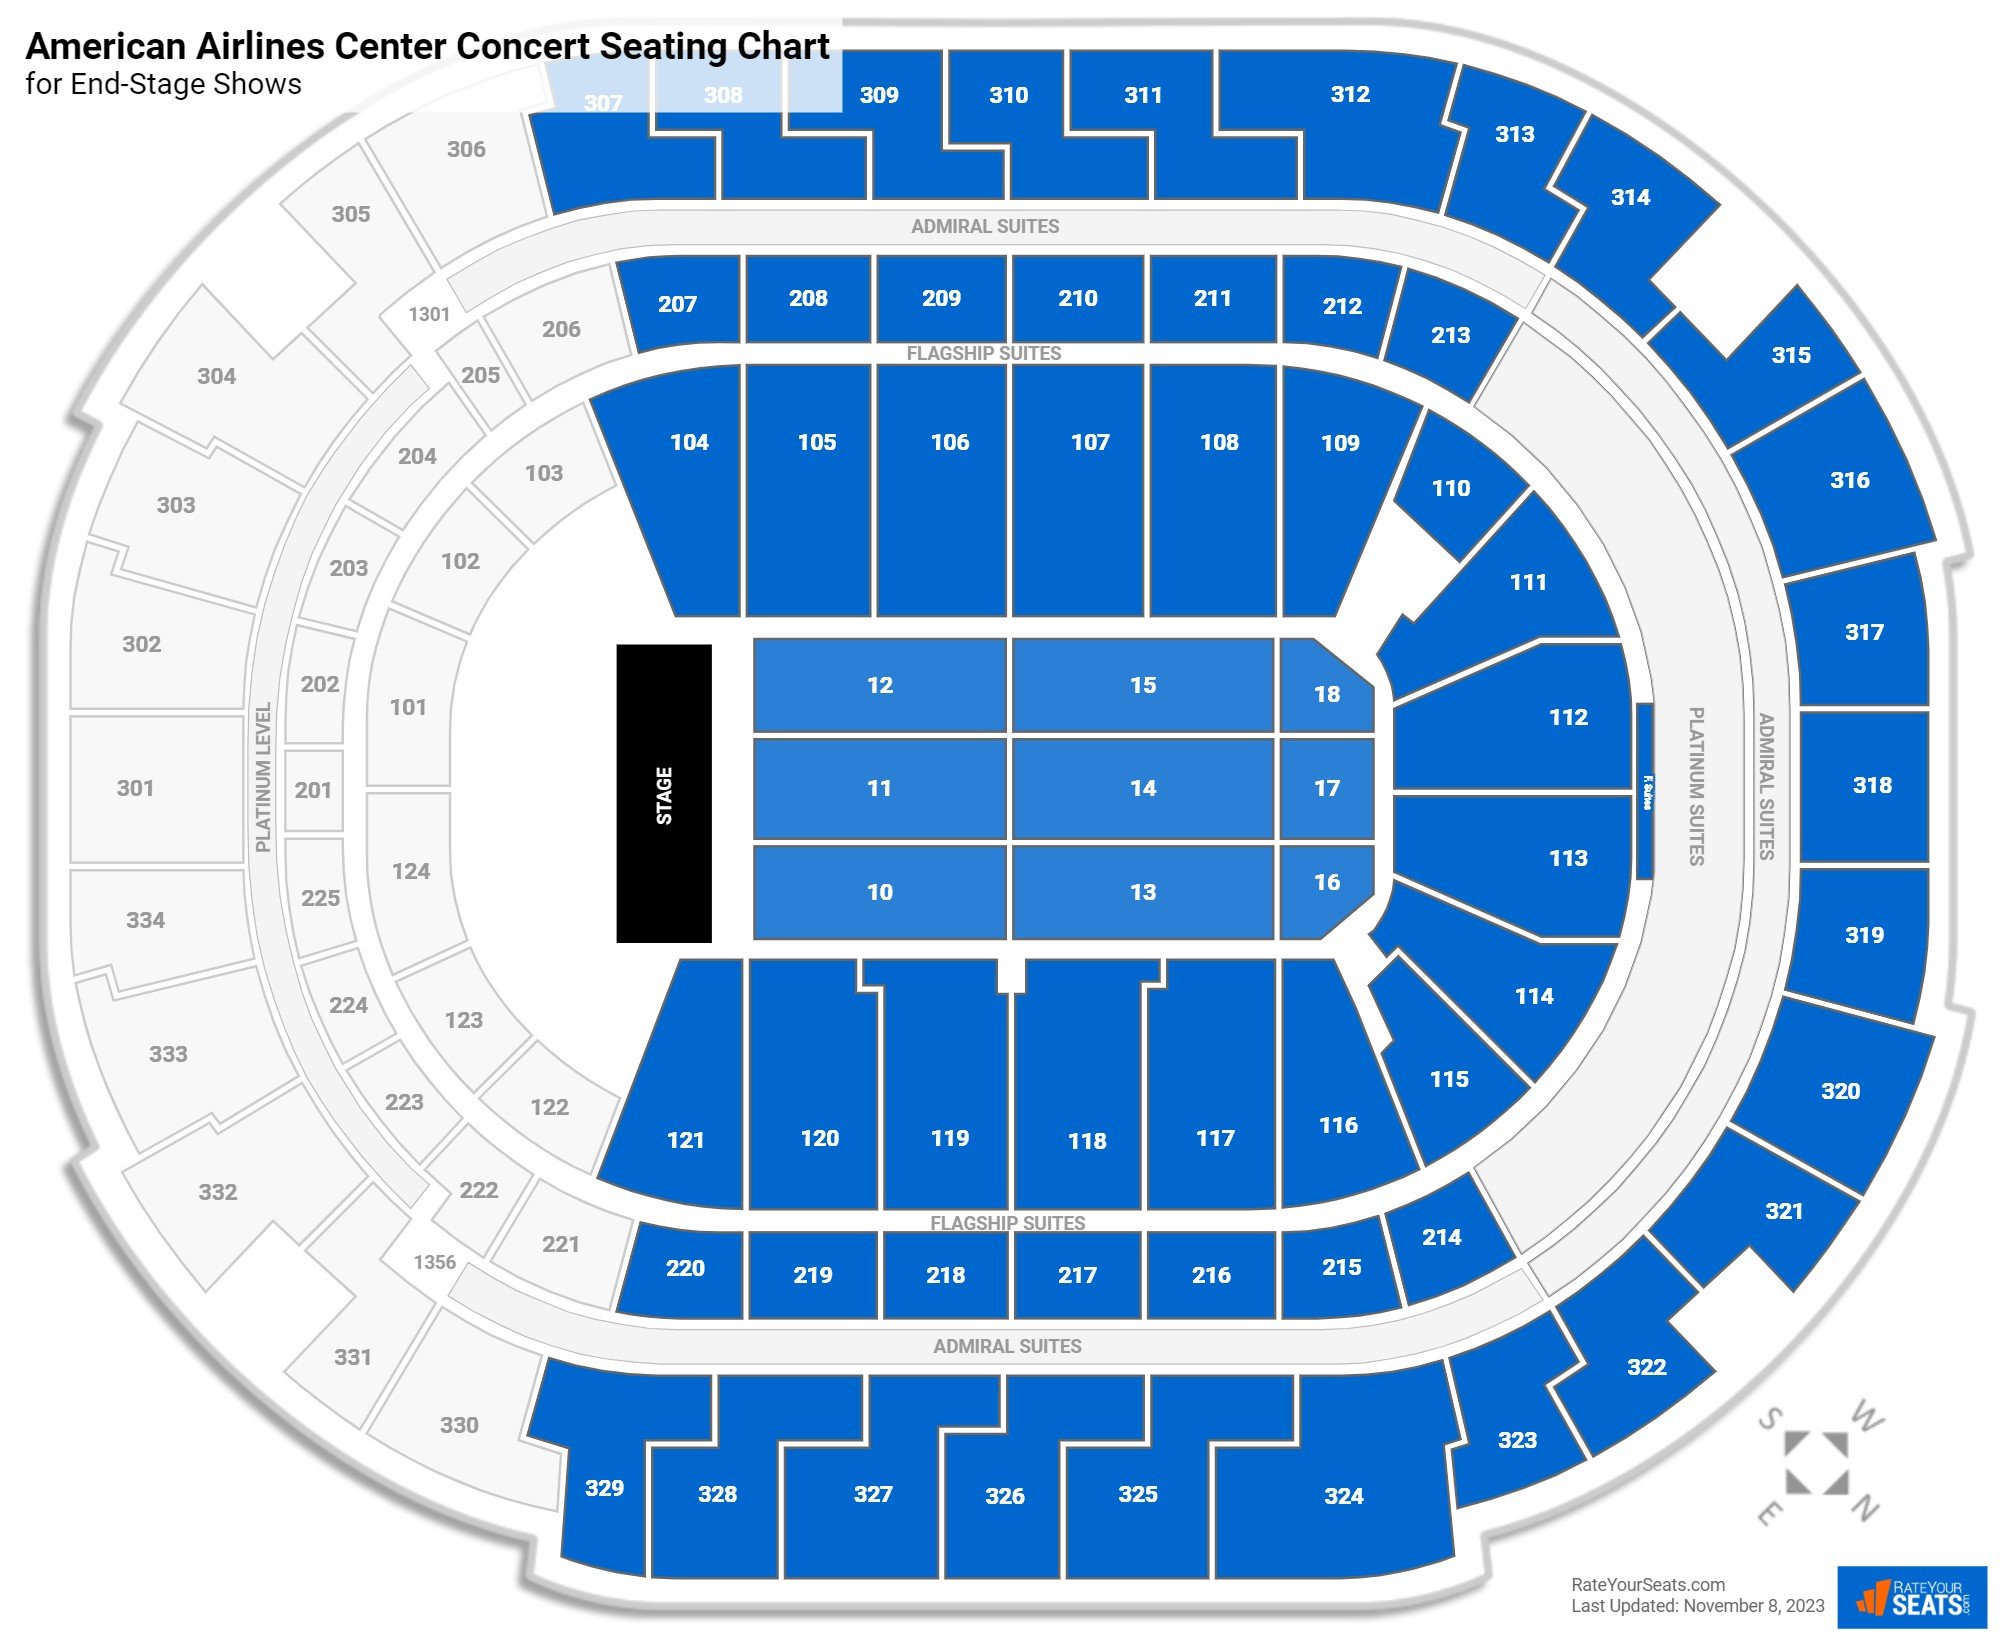 American Airlines Center Concert Seating Chart - RateYourSeats.com